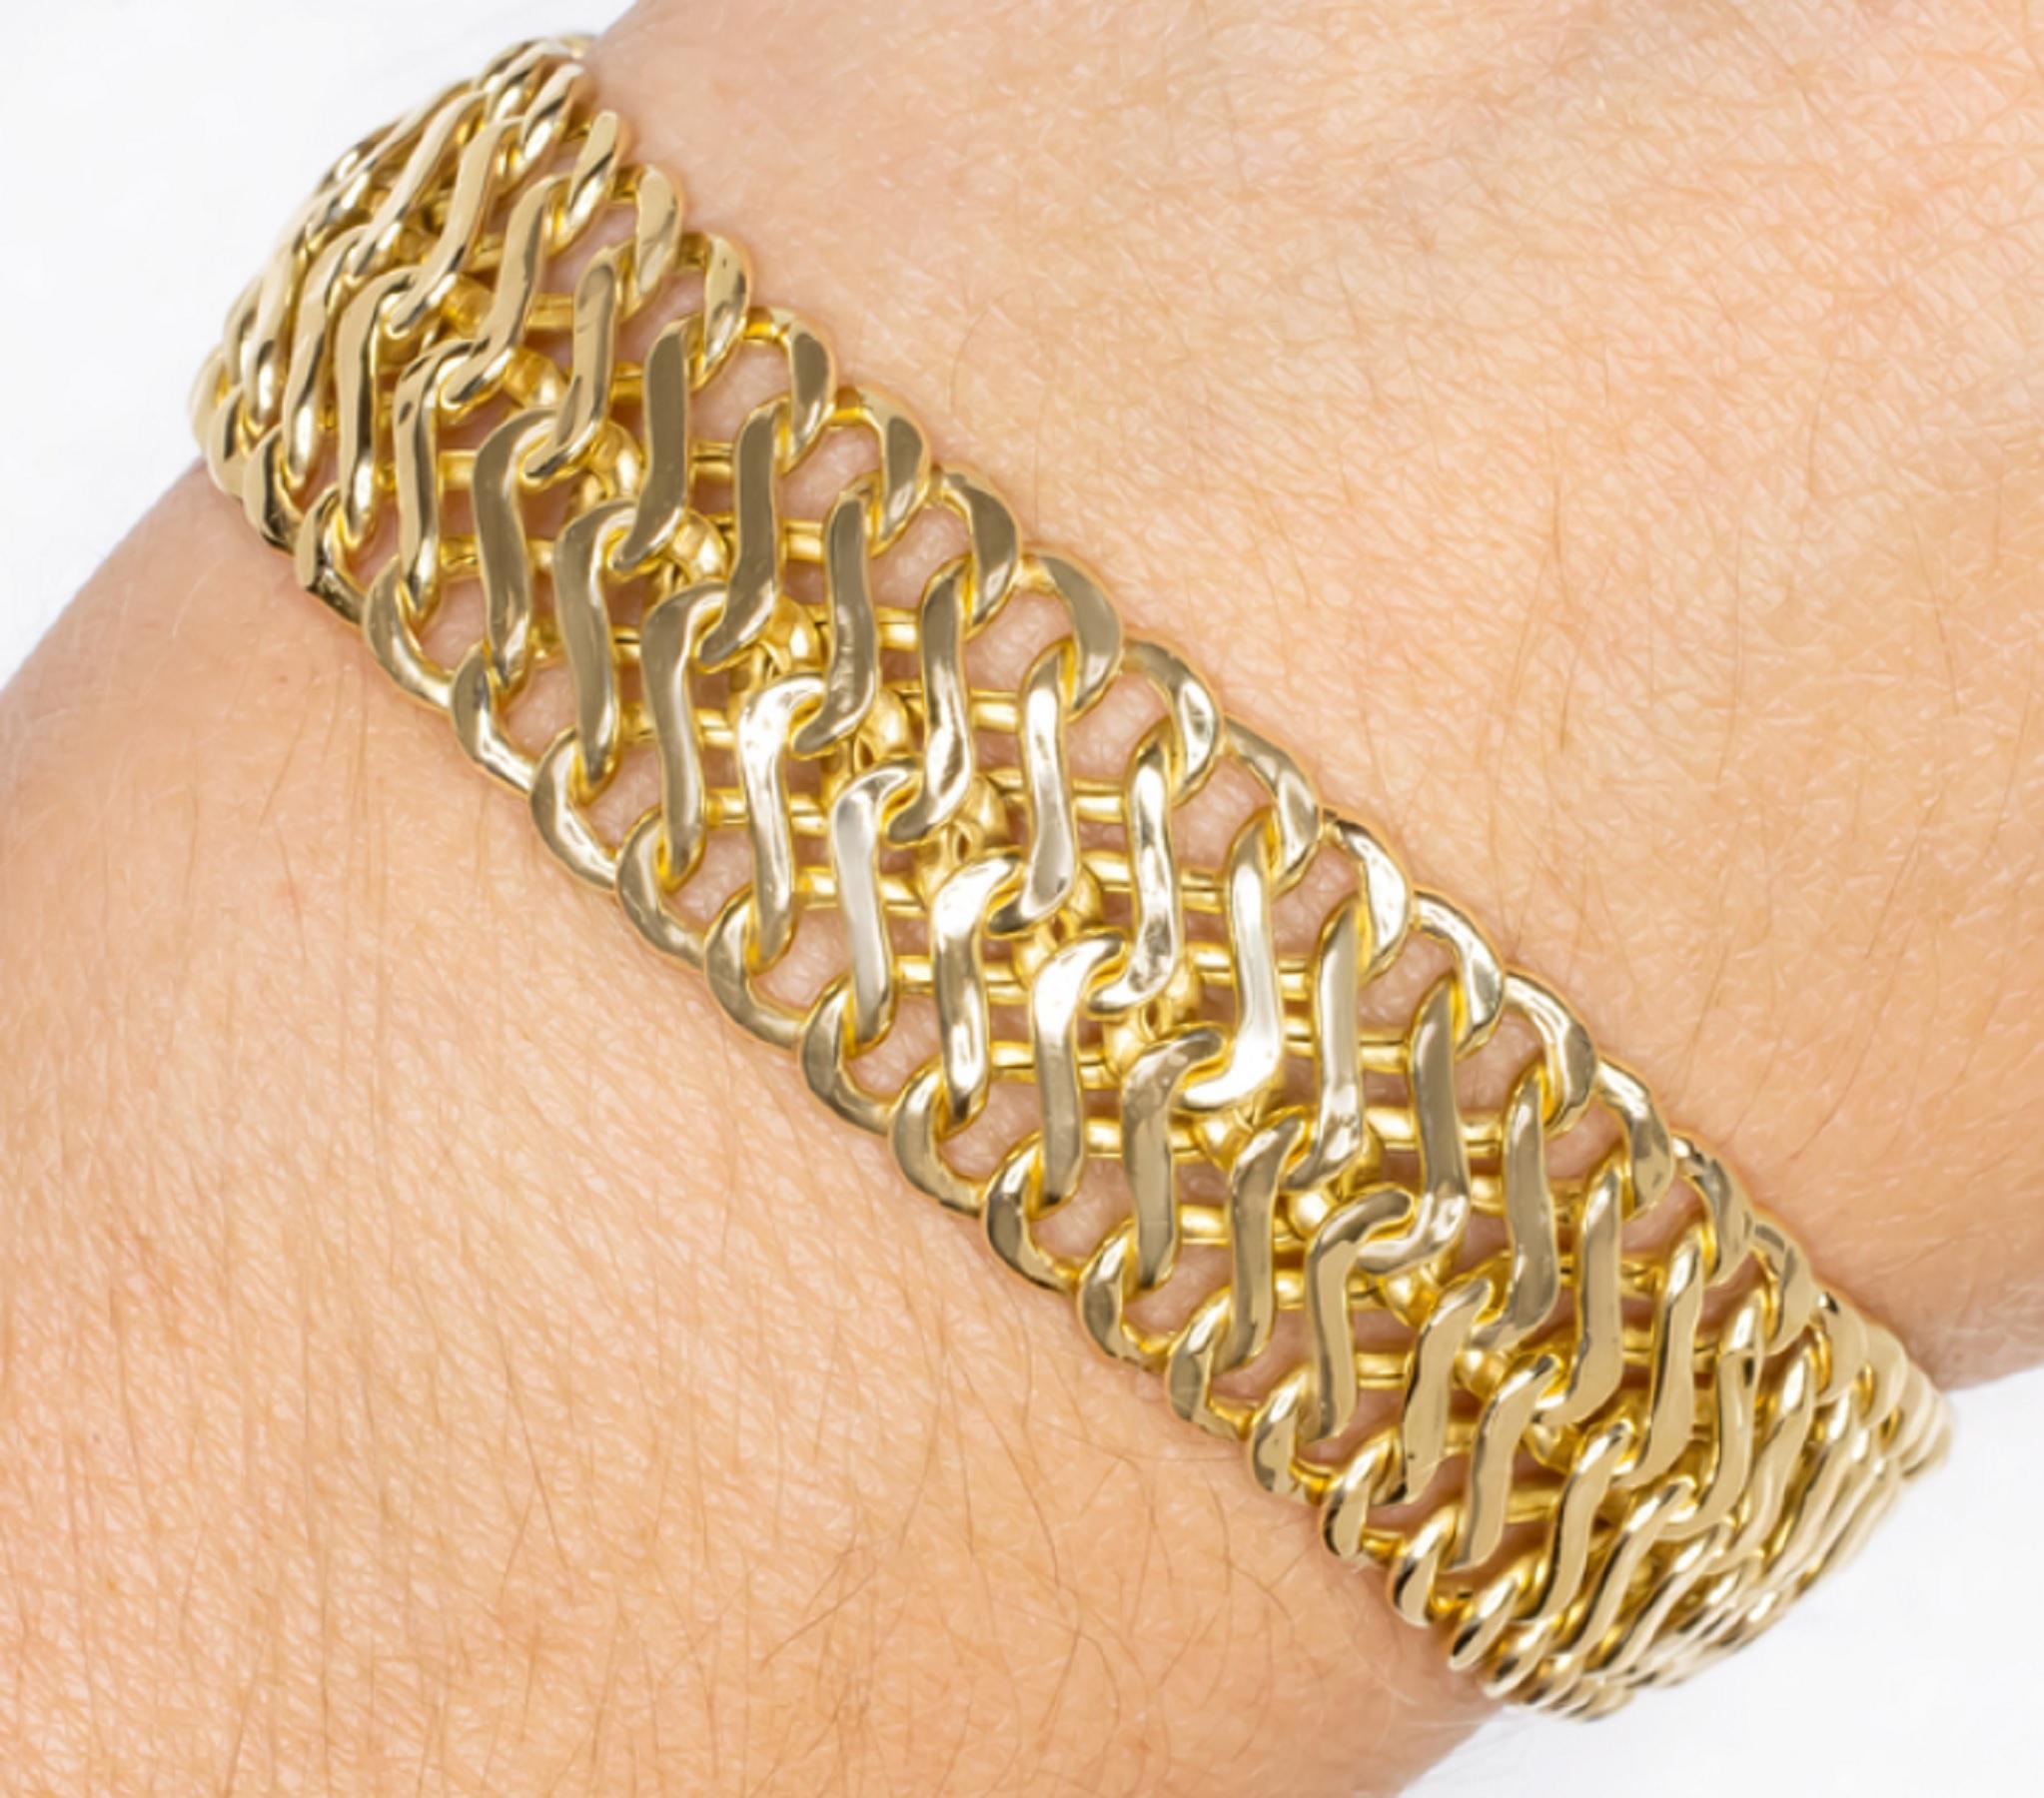 Solid 18k yellow gold double row chain bracelet has a sturdy look and feel. Crafted in Italy, this bracelet is very high quality and has a luxurious look and feel. This chain is made of solid 18k yellow gold, unlike the many plated or hollow link